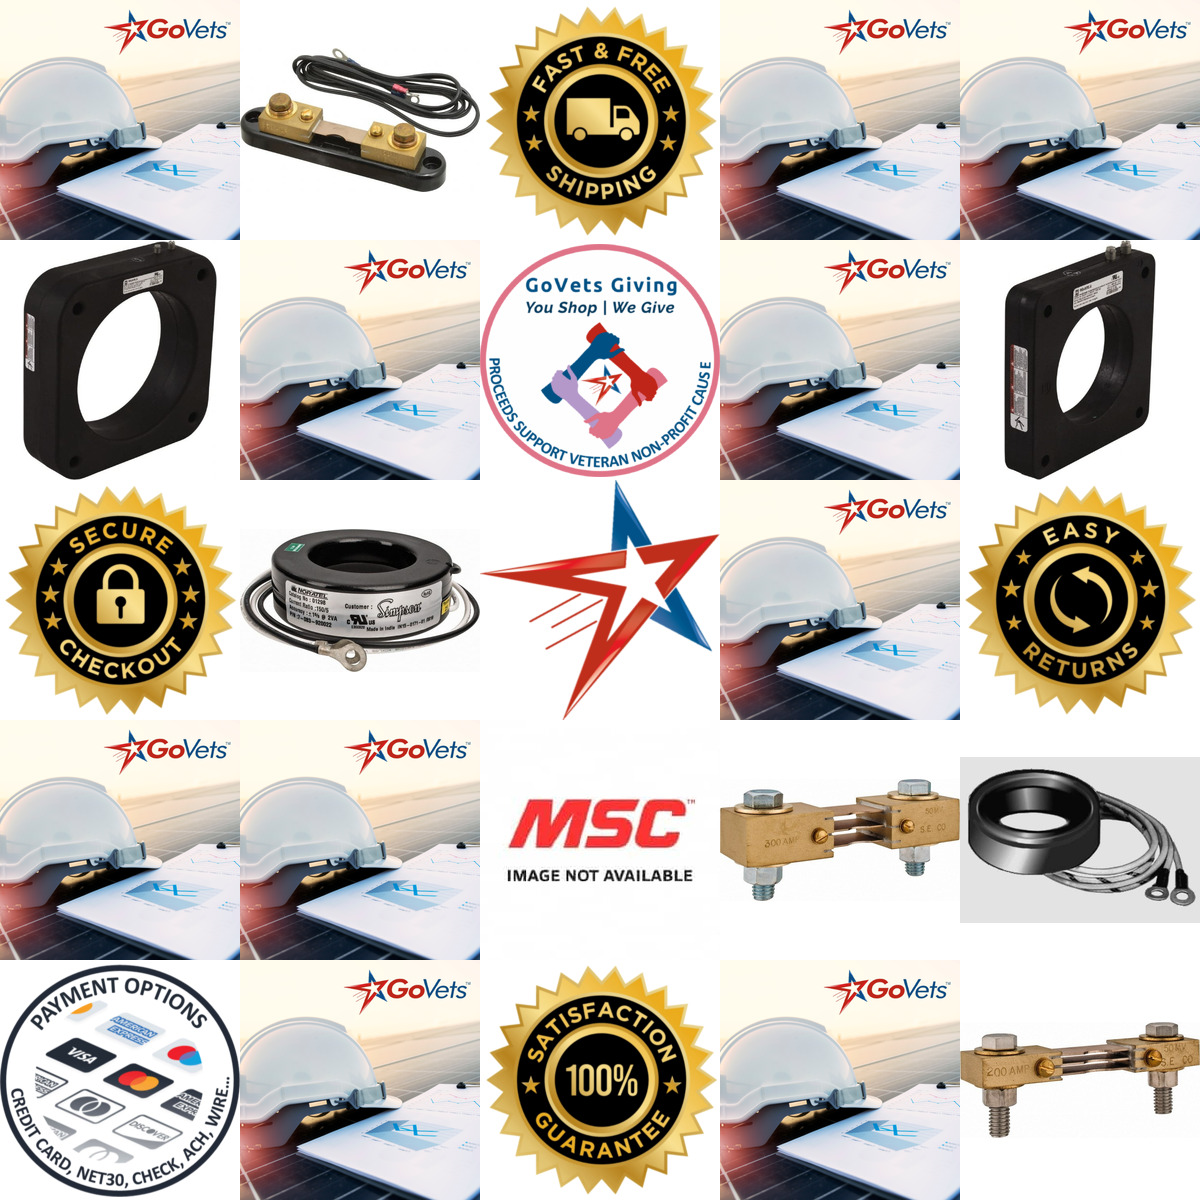 A selection of Panel Meter Accessories products on GoVets